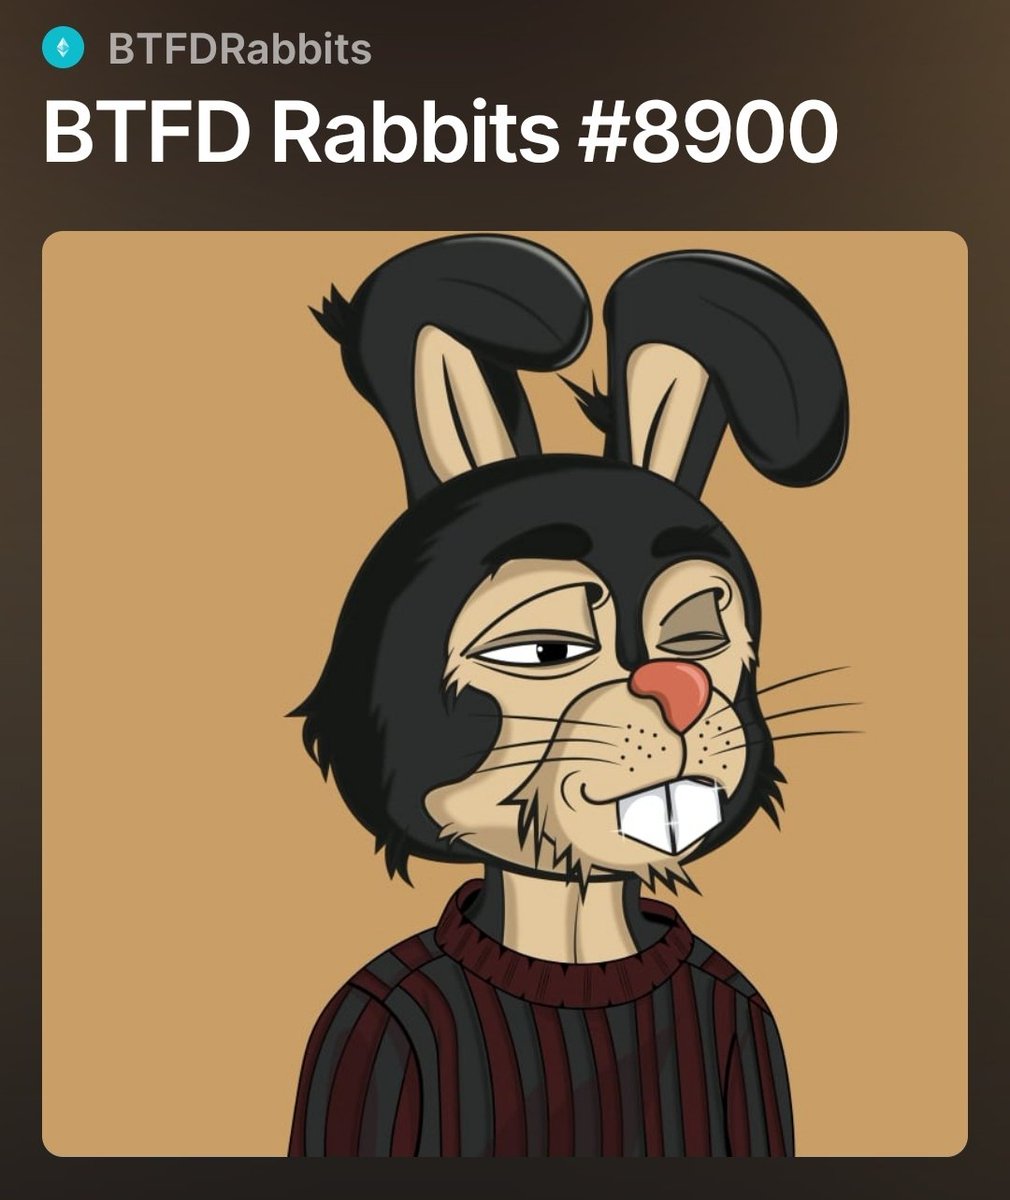 Thank you @BTFDRabbits for this amazing guy. Inthink it looks like me, actually 😁🙏❤️❤️❤️🐰 Can't wait to chat with you today.